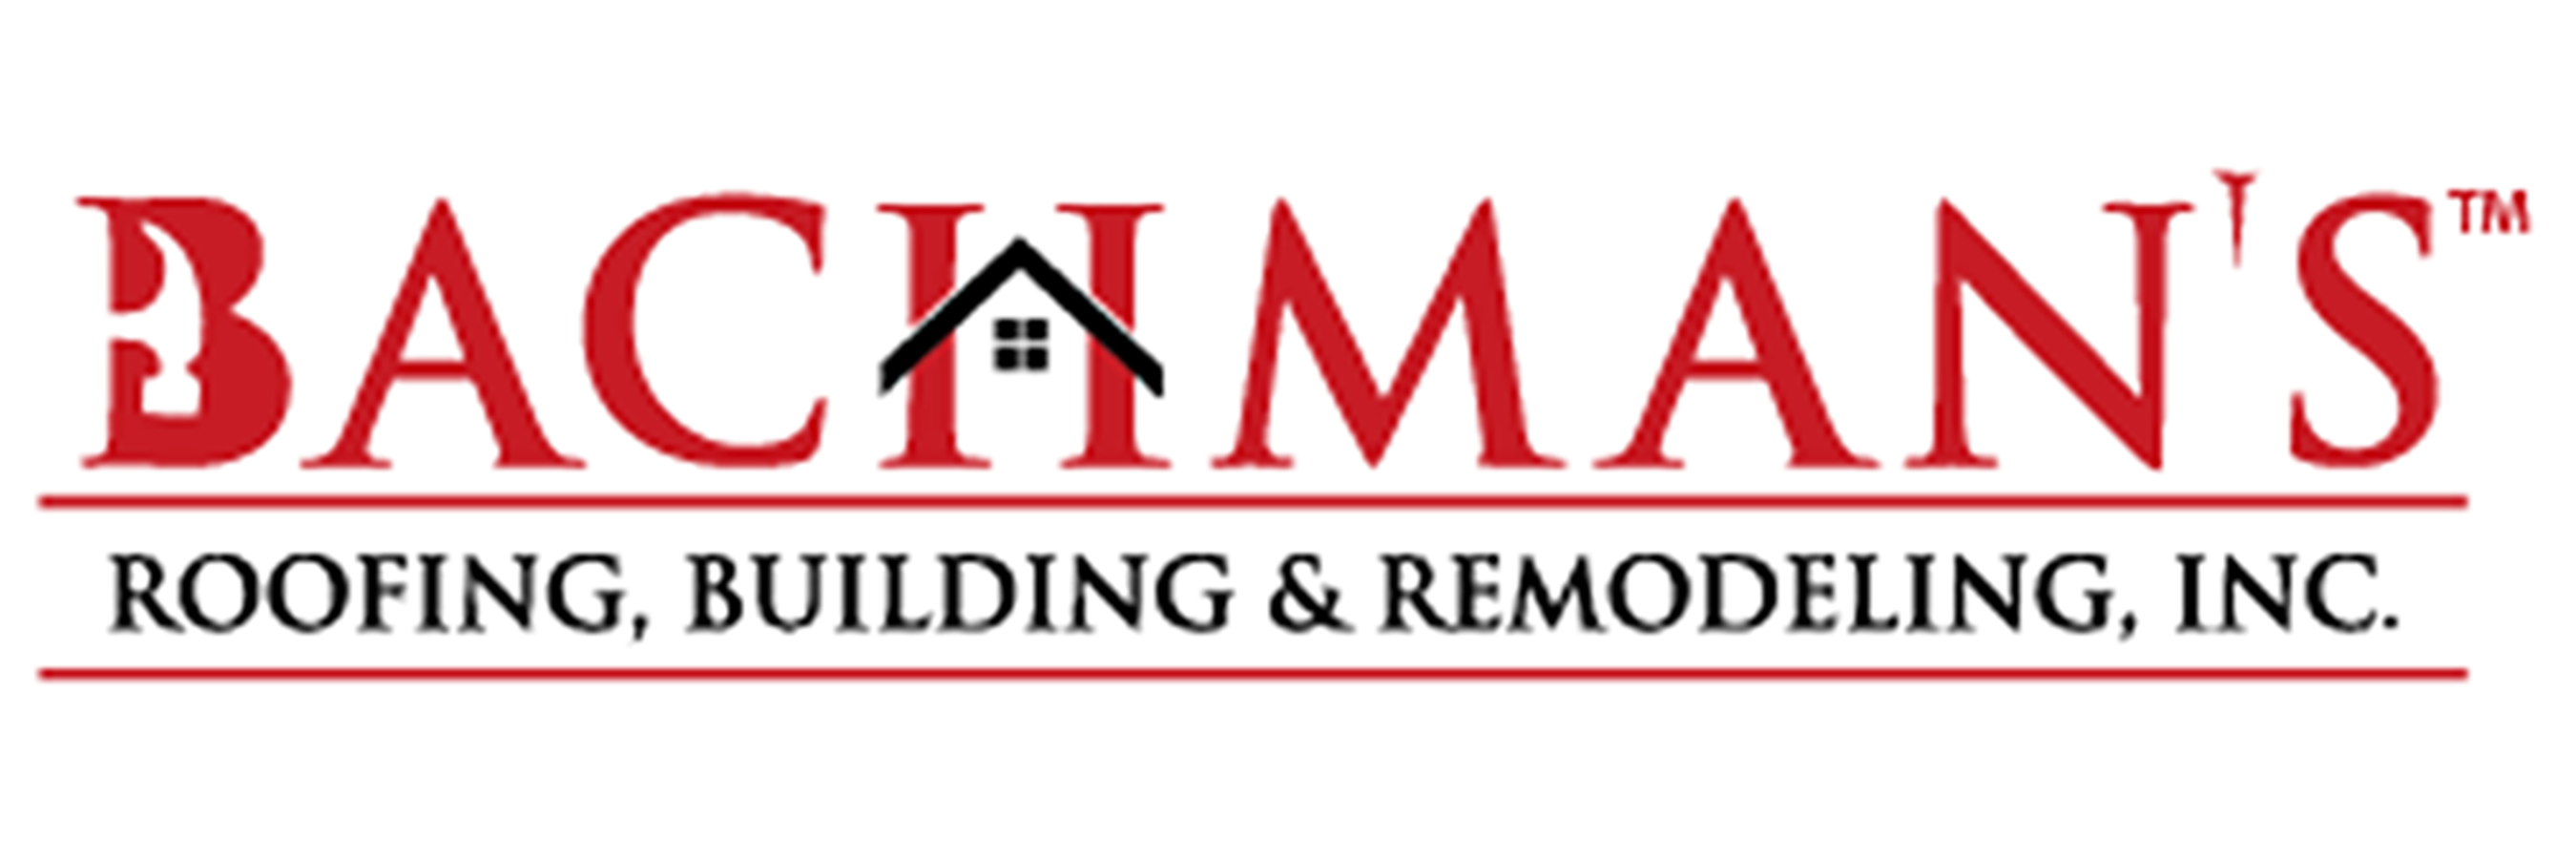 Bachman's Roofing, Building & Remodeling, Inc. logo